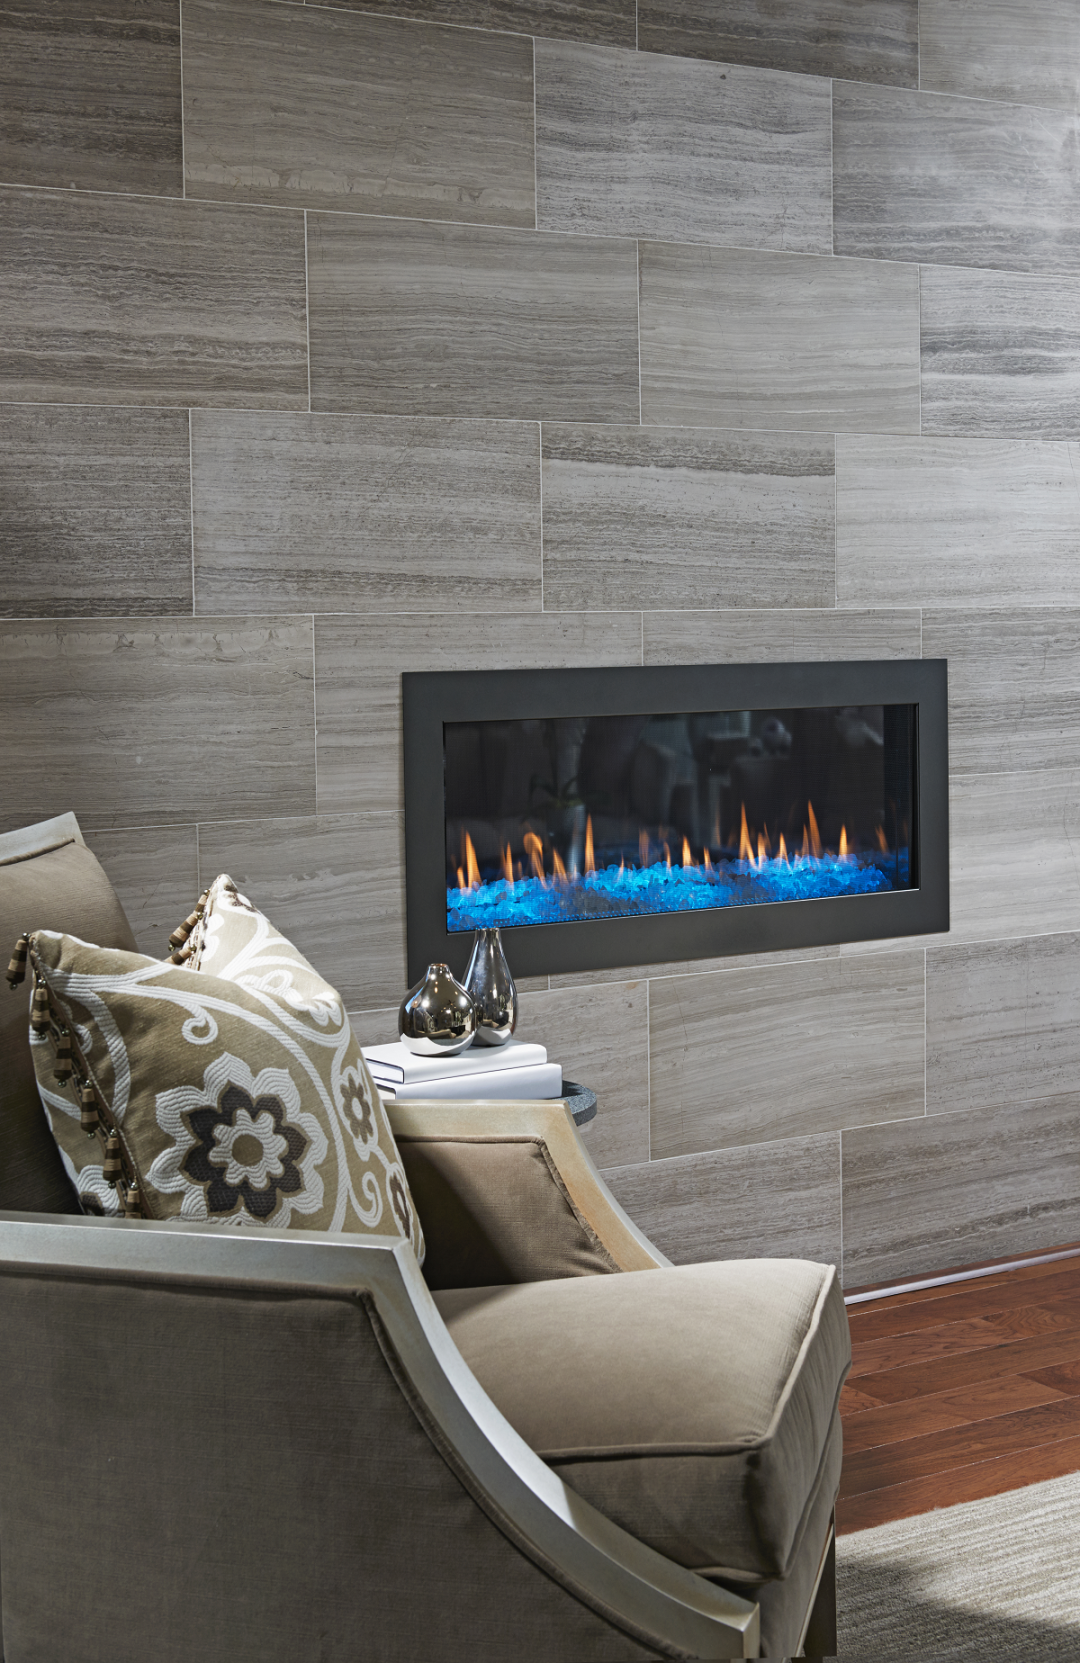 Love the floor-to-ceiling tile surround on this fireplace in the